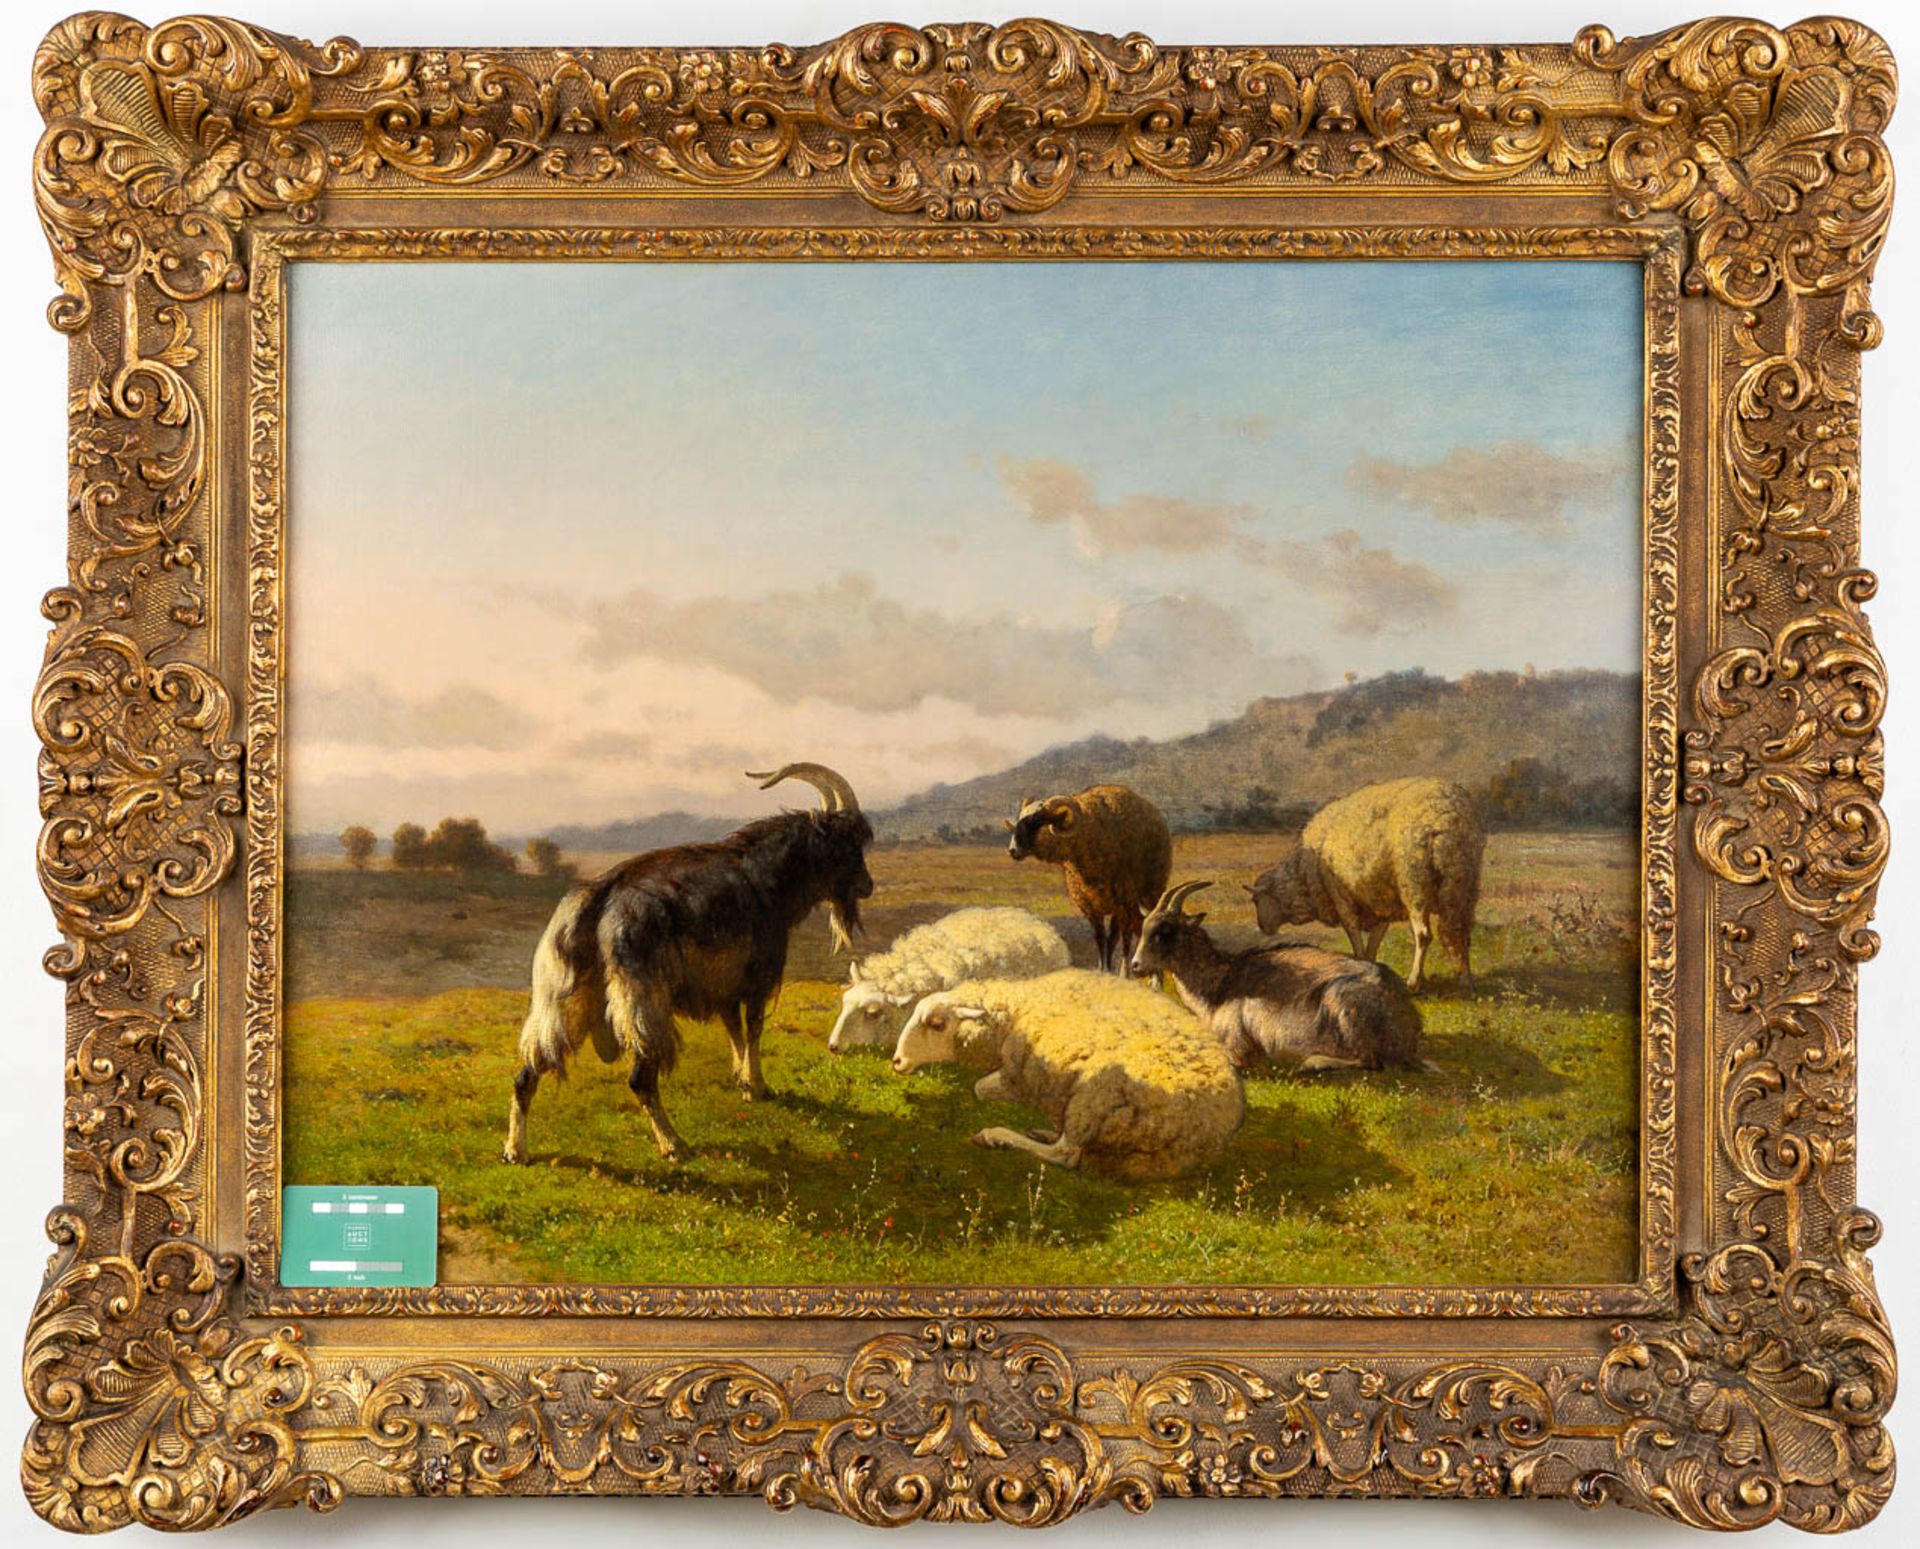 Louis ROBBE (1806-1887) 'Sheep and Rams' oil on canvas. (W:76 x H:57 cm) - Image 2 of 7